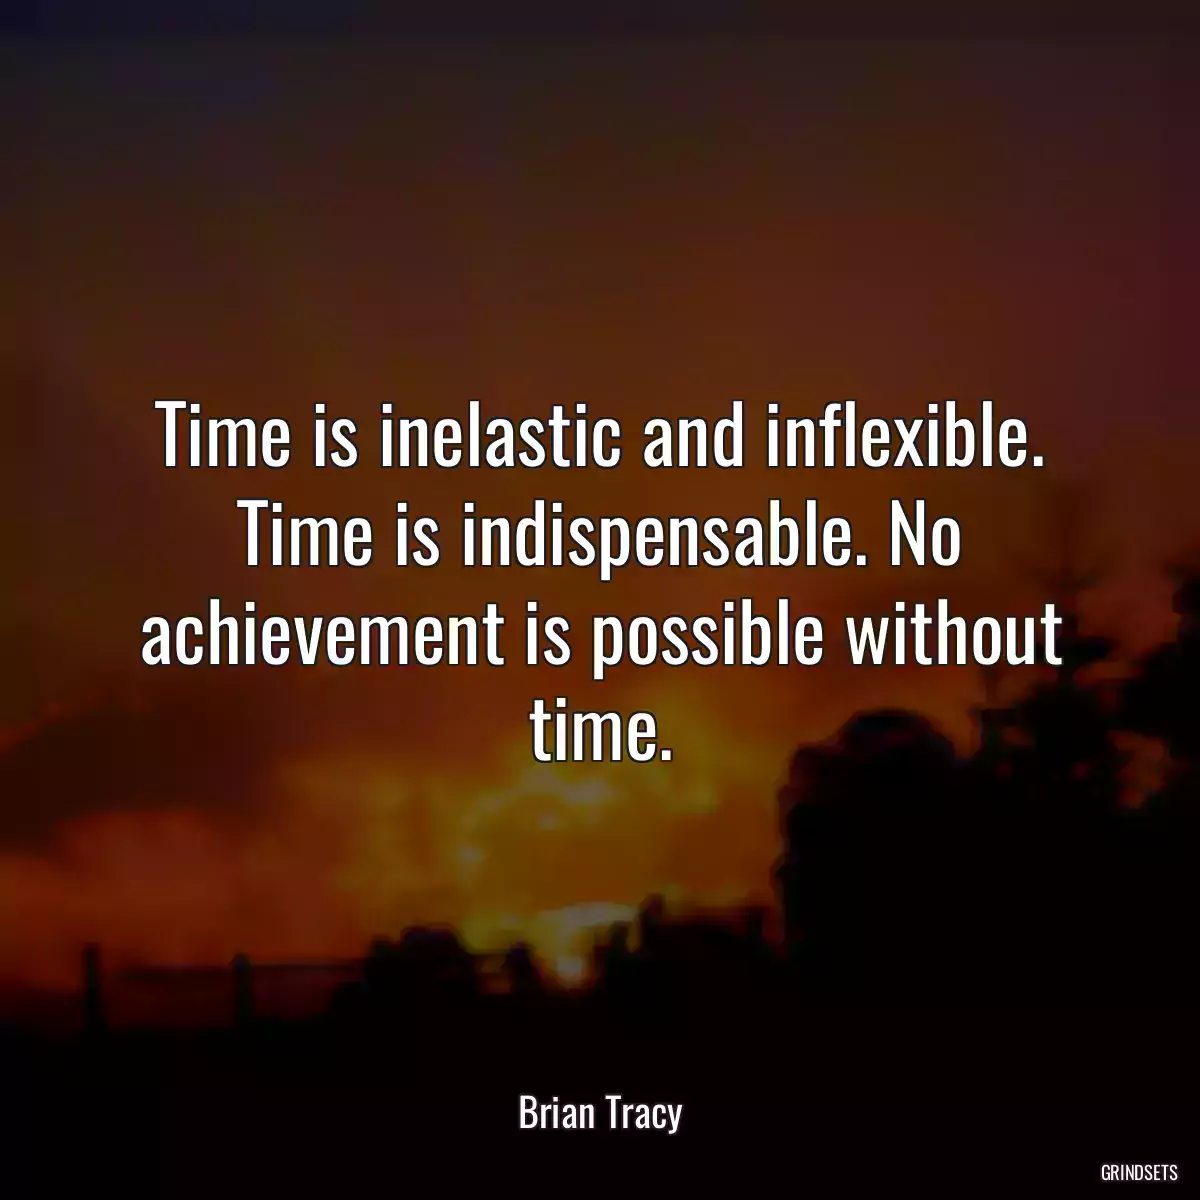 Time is inelastic and inflexible. Time is indispensable. No achievement is possible without time.